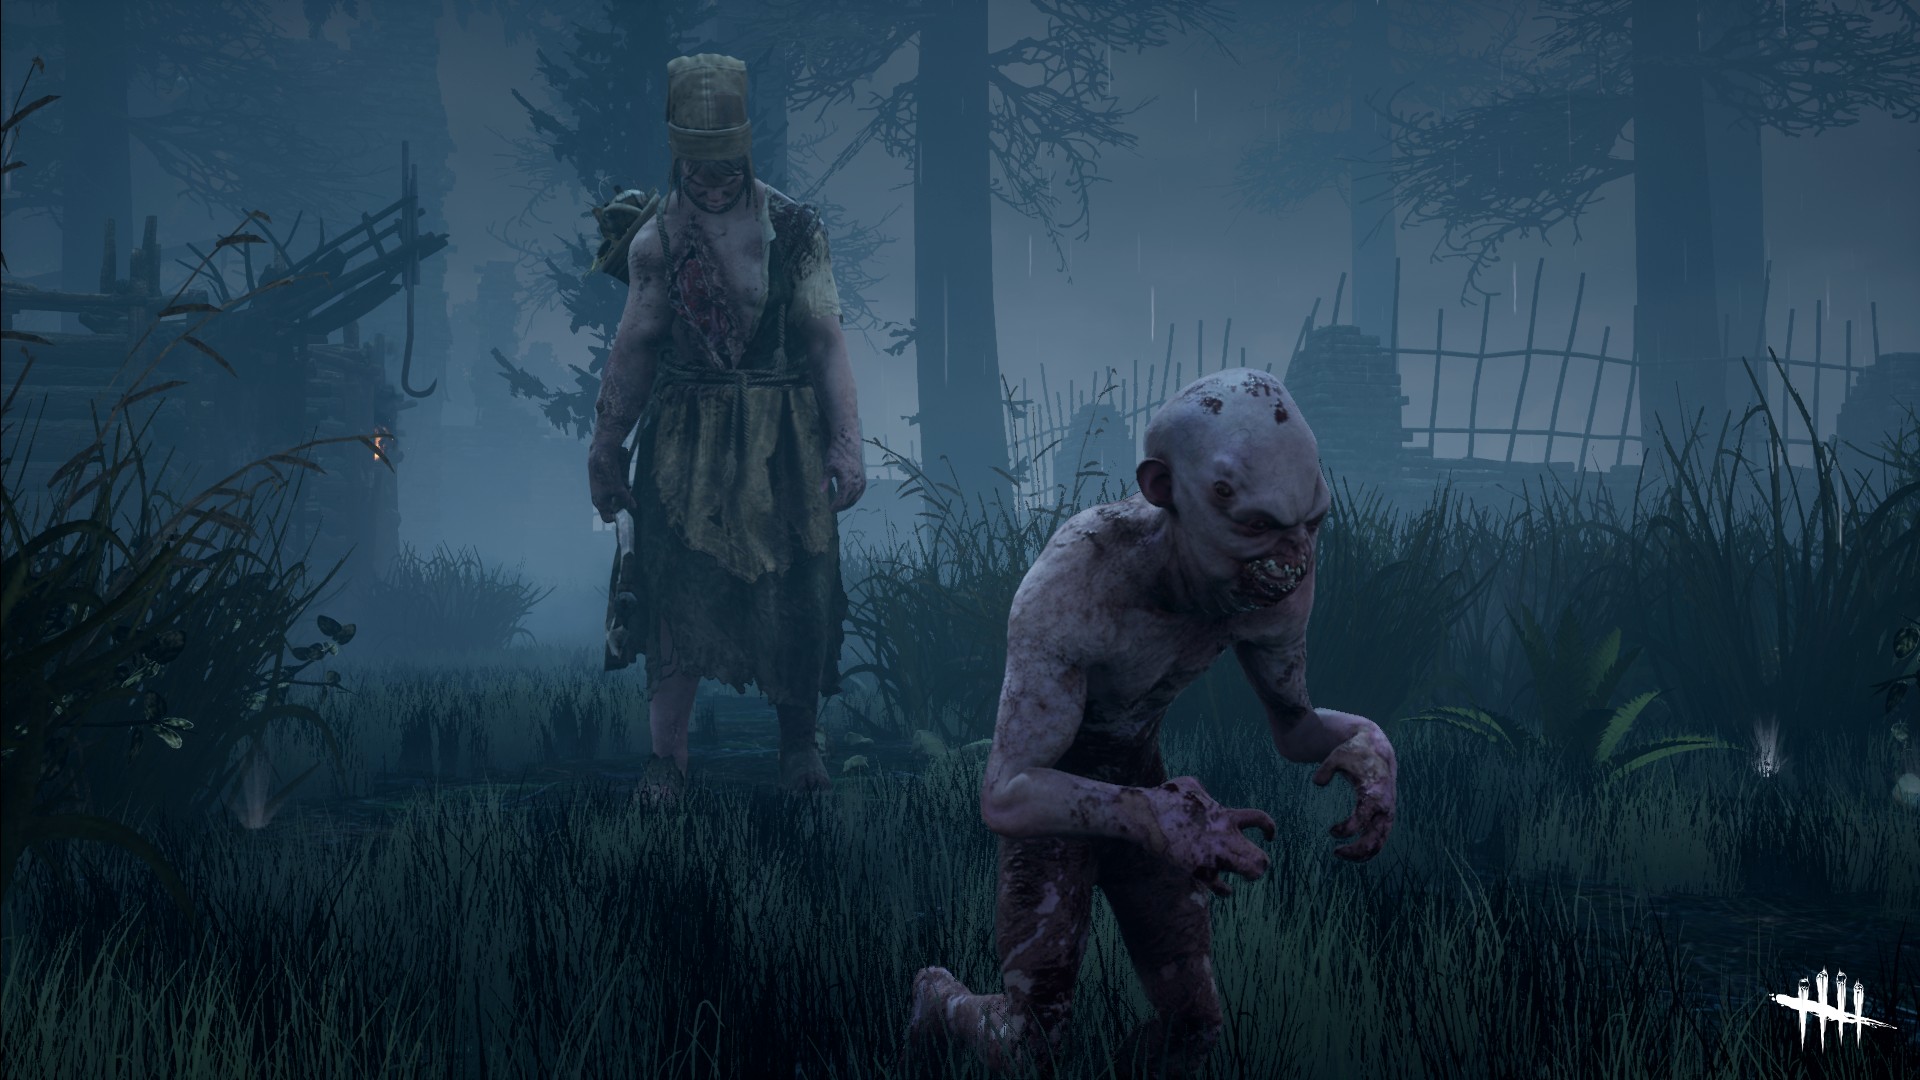 the twins dead by daylight